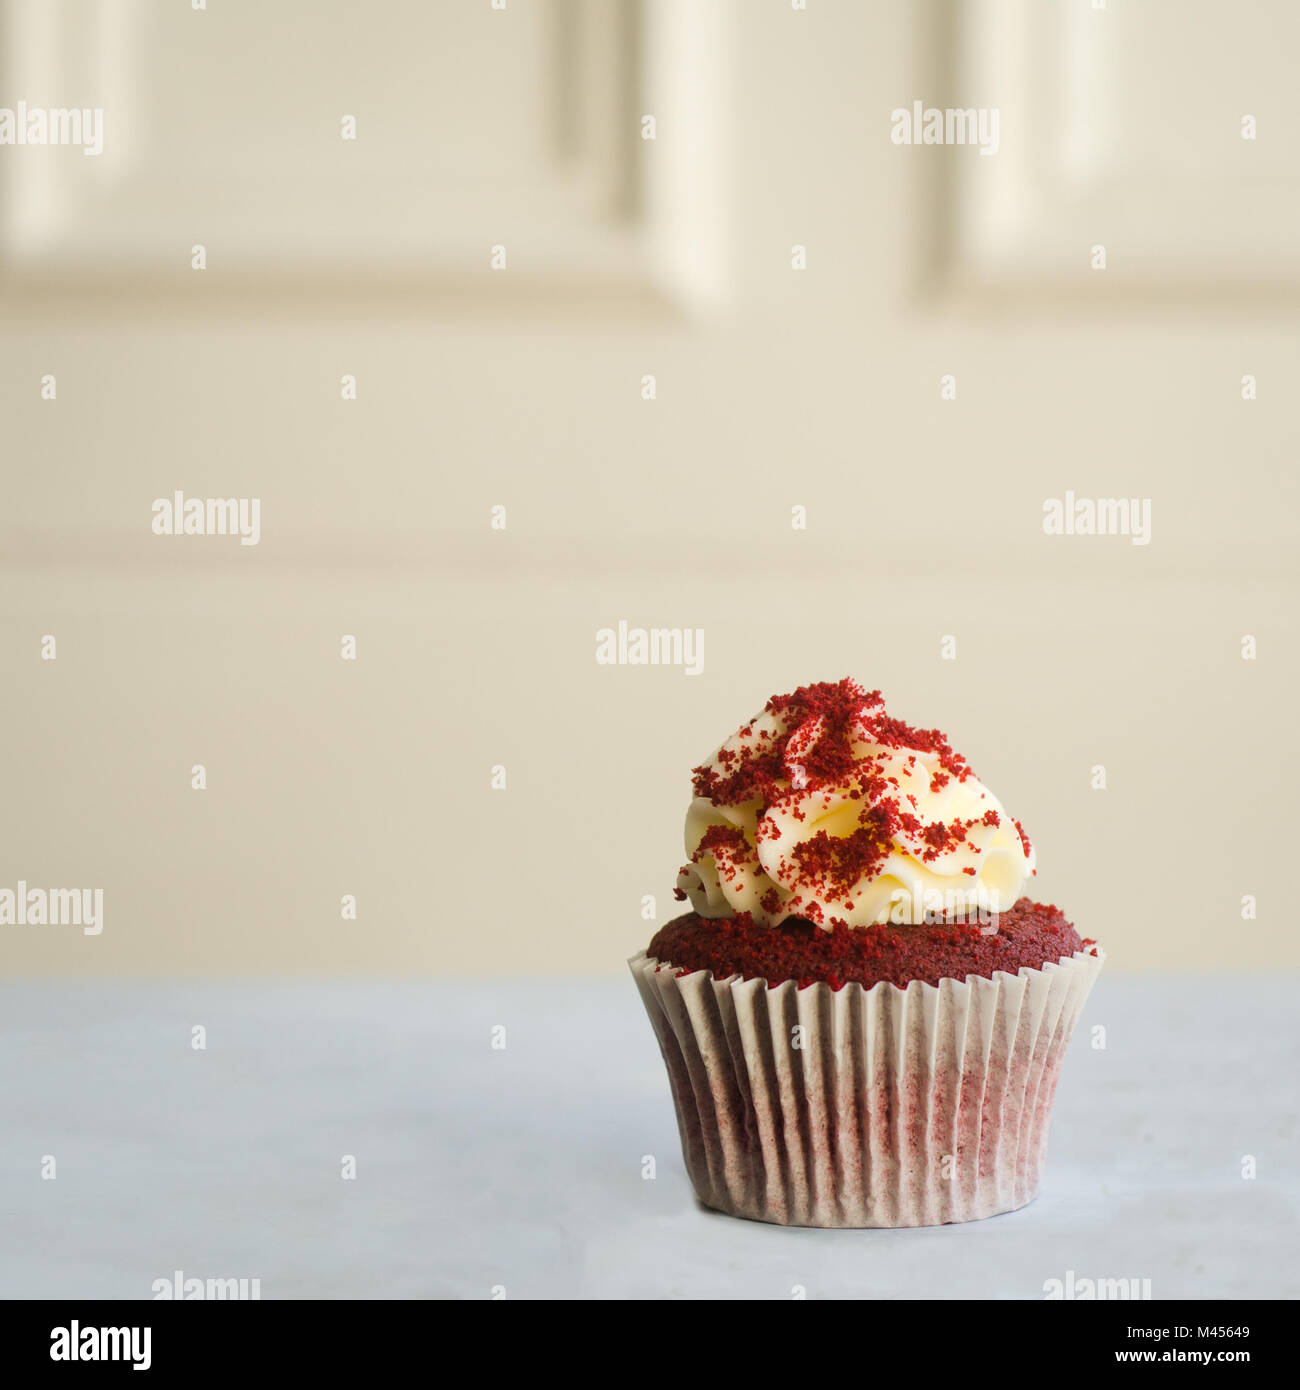 Close Up of a Home Baked Red Velvet Cupcake With Buttercream Frosting Stock Photo